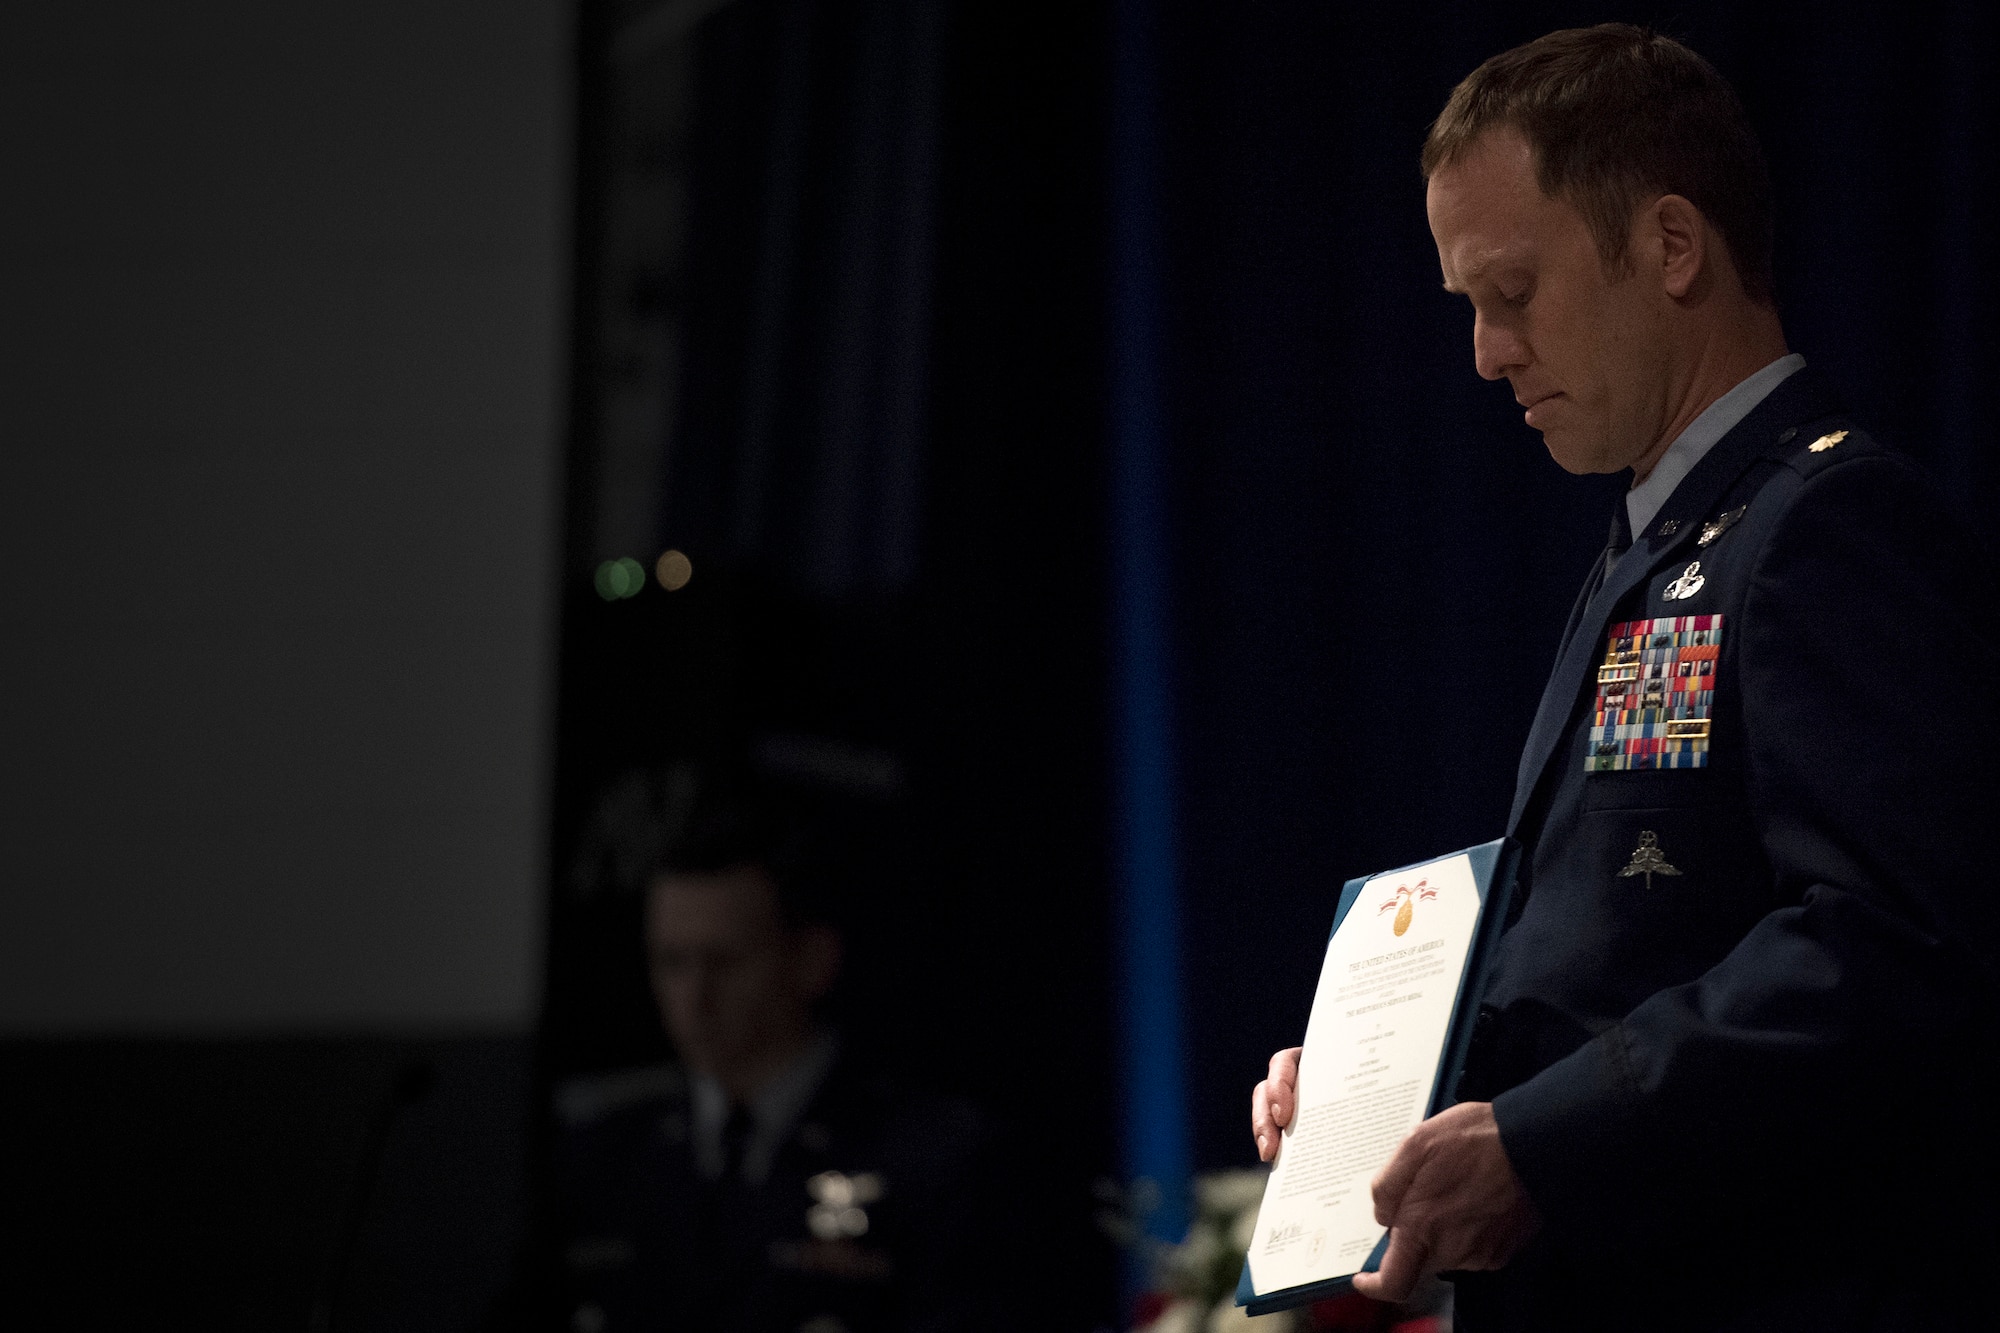 Maj. Jason Egger, 38th Rescue Squadron commander, presents a Meritorious Service Medal citation during a memorial service in honor of Capt. Mark Weber, March 21, 2018, at Moody Air Force Base, Ga. Weber, a 38th RQS combat rescue officer and Texas native, was killed in an HH-60G Pave Hawk crash in Anbar Province, Iraq, March 15. During the ceremony, Weber was posthumously awarded a Meritorious Service Medal and the Air Force Commendation Medal. (U.S. Air Force photo by Staff Sgt. Ryan Callaghan)